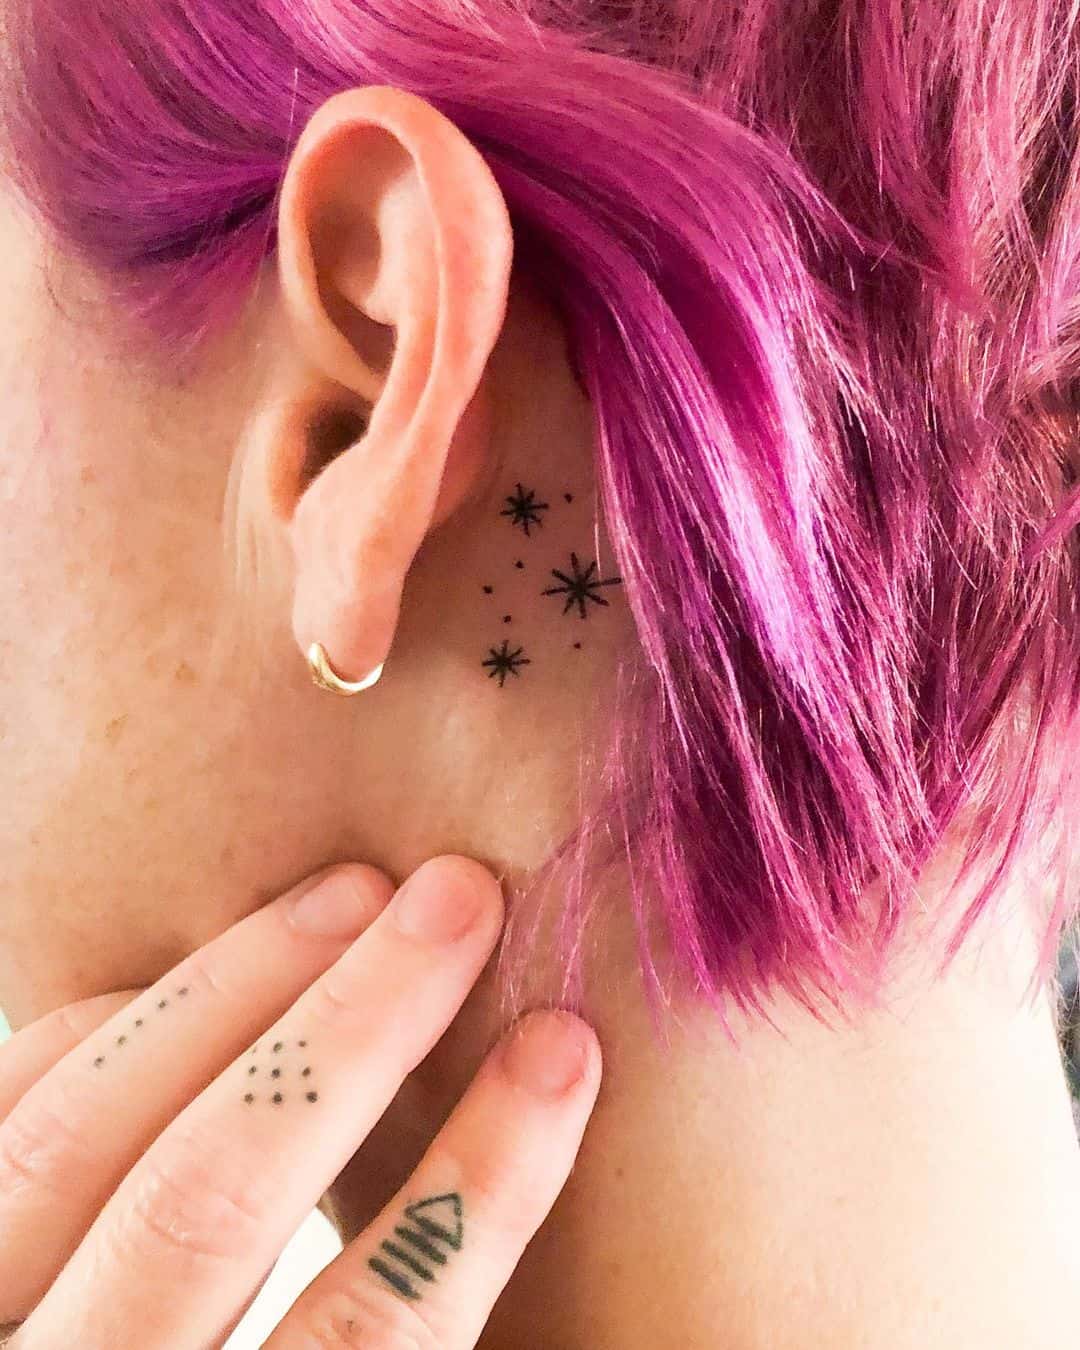 Behind The Ear Tattoos: How Much Do They Really Hurt? - Saved Tattoo